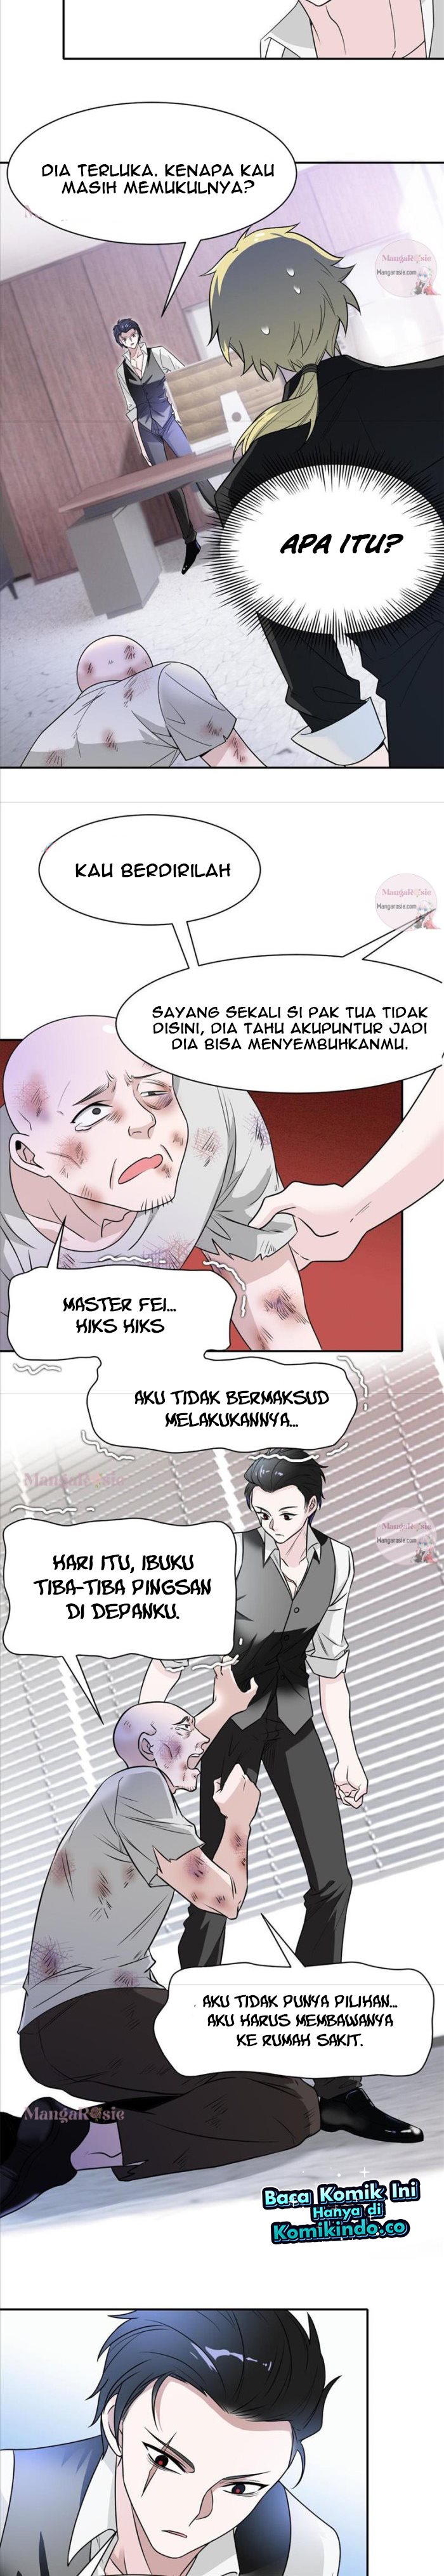 The Strong Man From the Mental Hospital Chapter 107 6